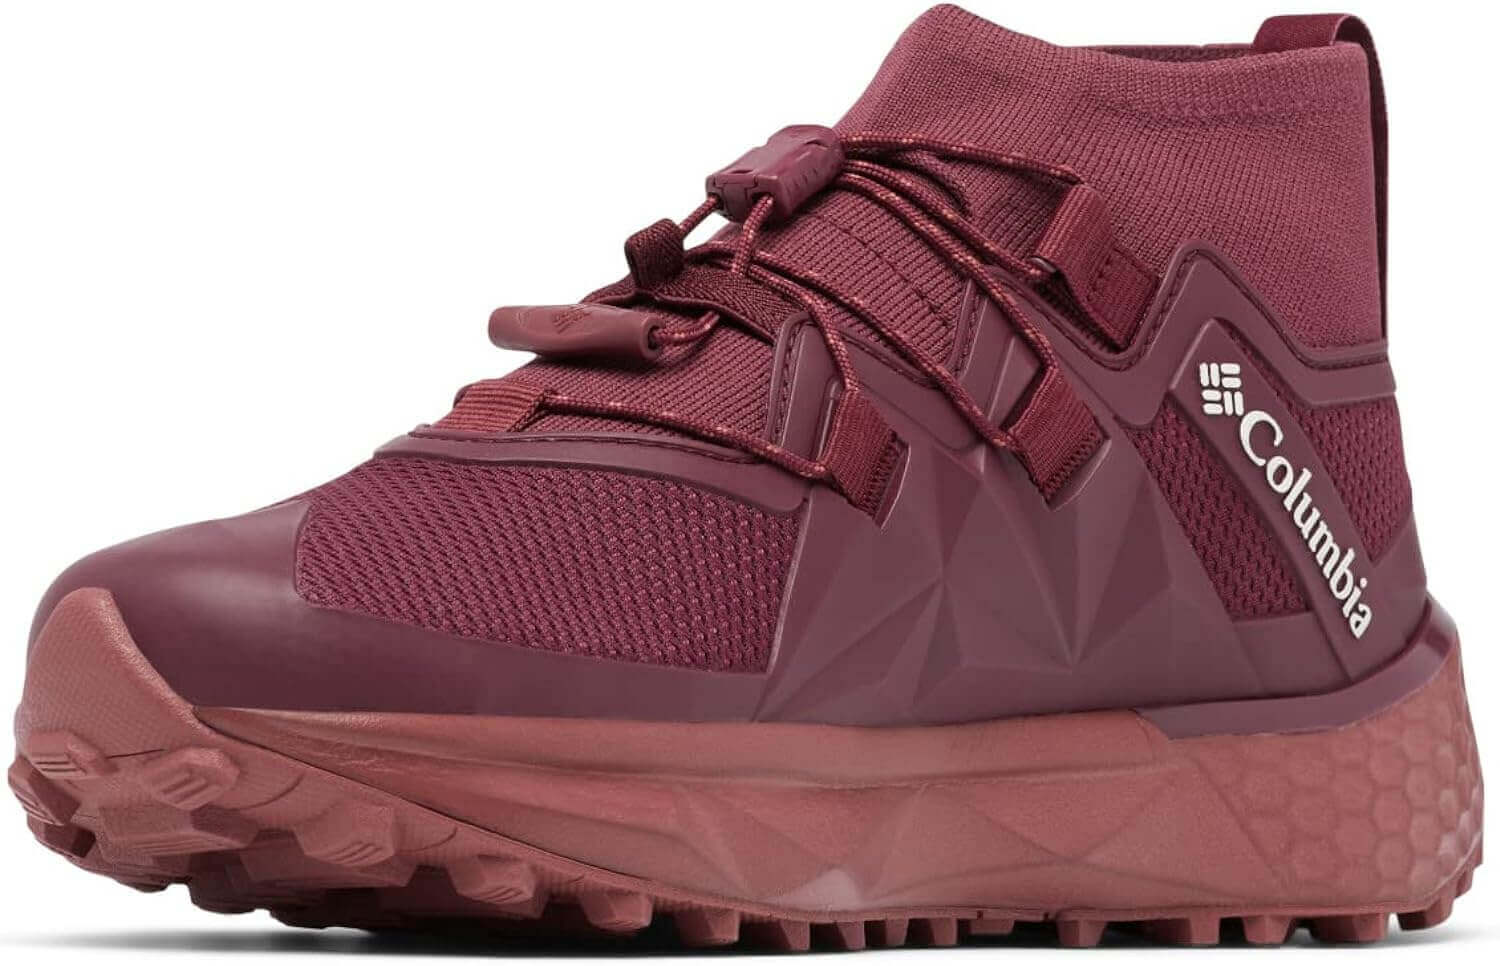 Shop The Latest >Columbia Women's Facet 75 Alpha Outdry Hiking Shoe > *Only $216.00*> From The Top Brand > *Columbial* > Shop Now and Get Free Shipping On Orders Over $45.00 >*Shop Earth Foot*